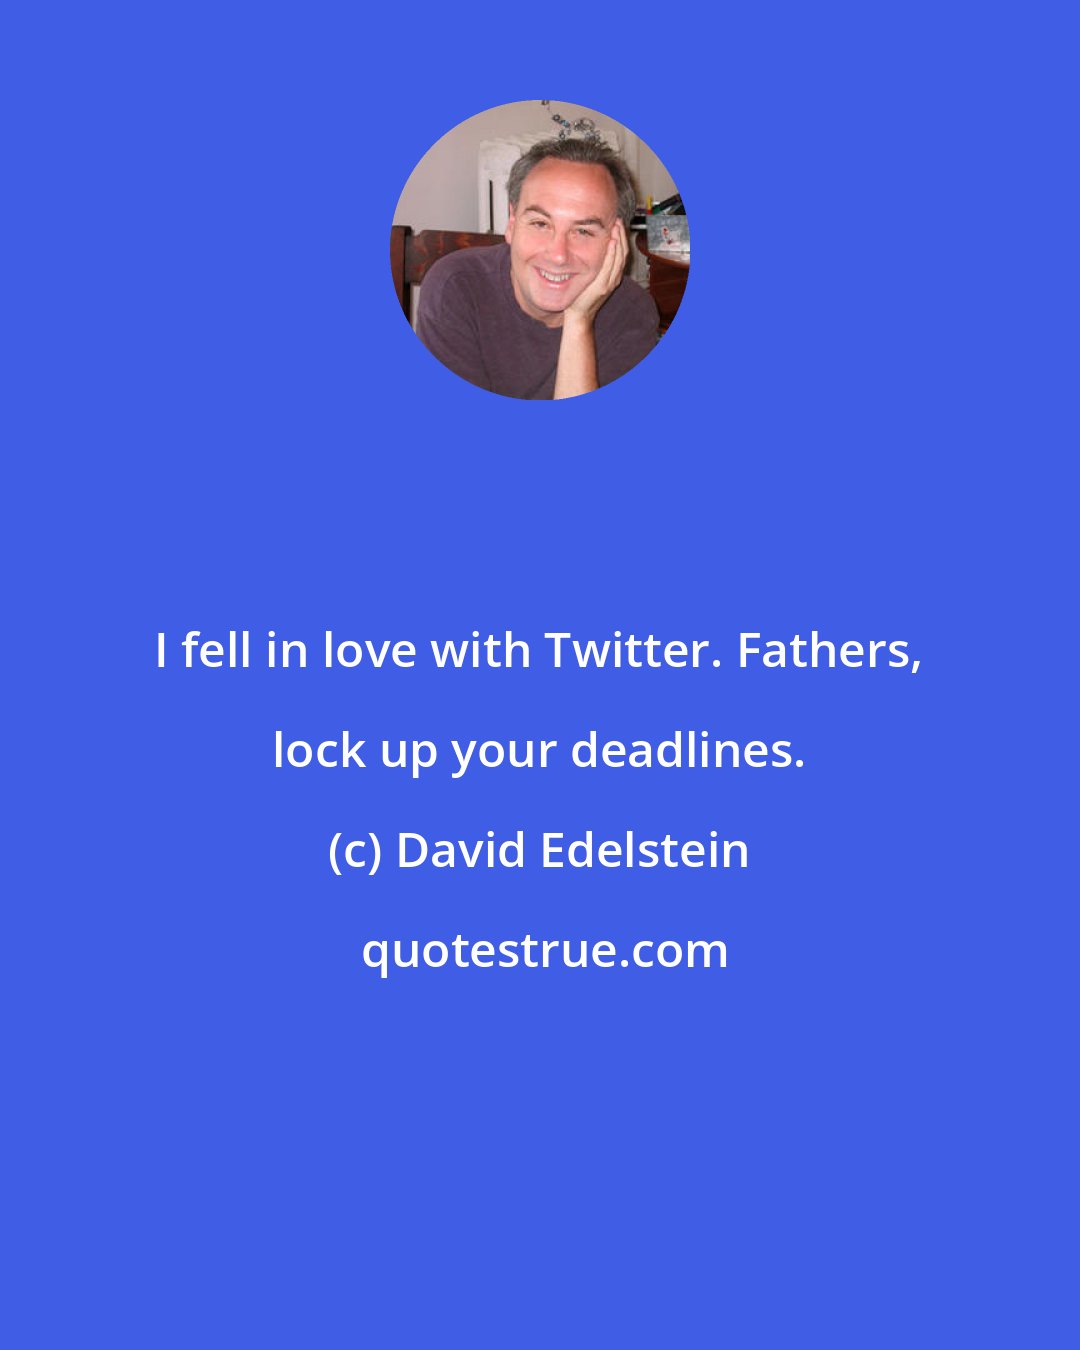 David Edelstein: I fell in love with Twitter. Fathers, lock up your deadlines.